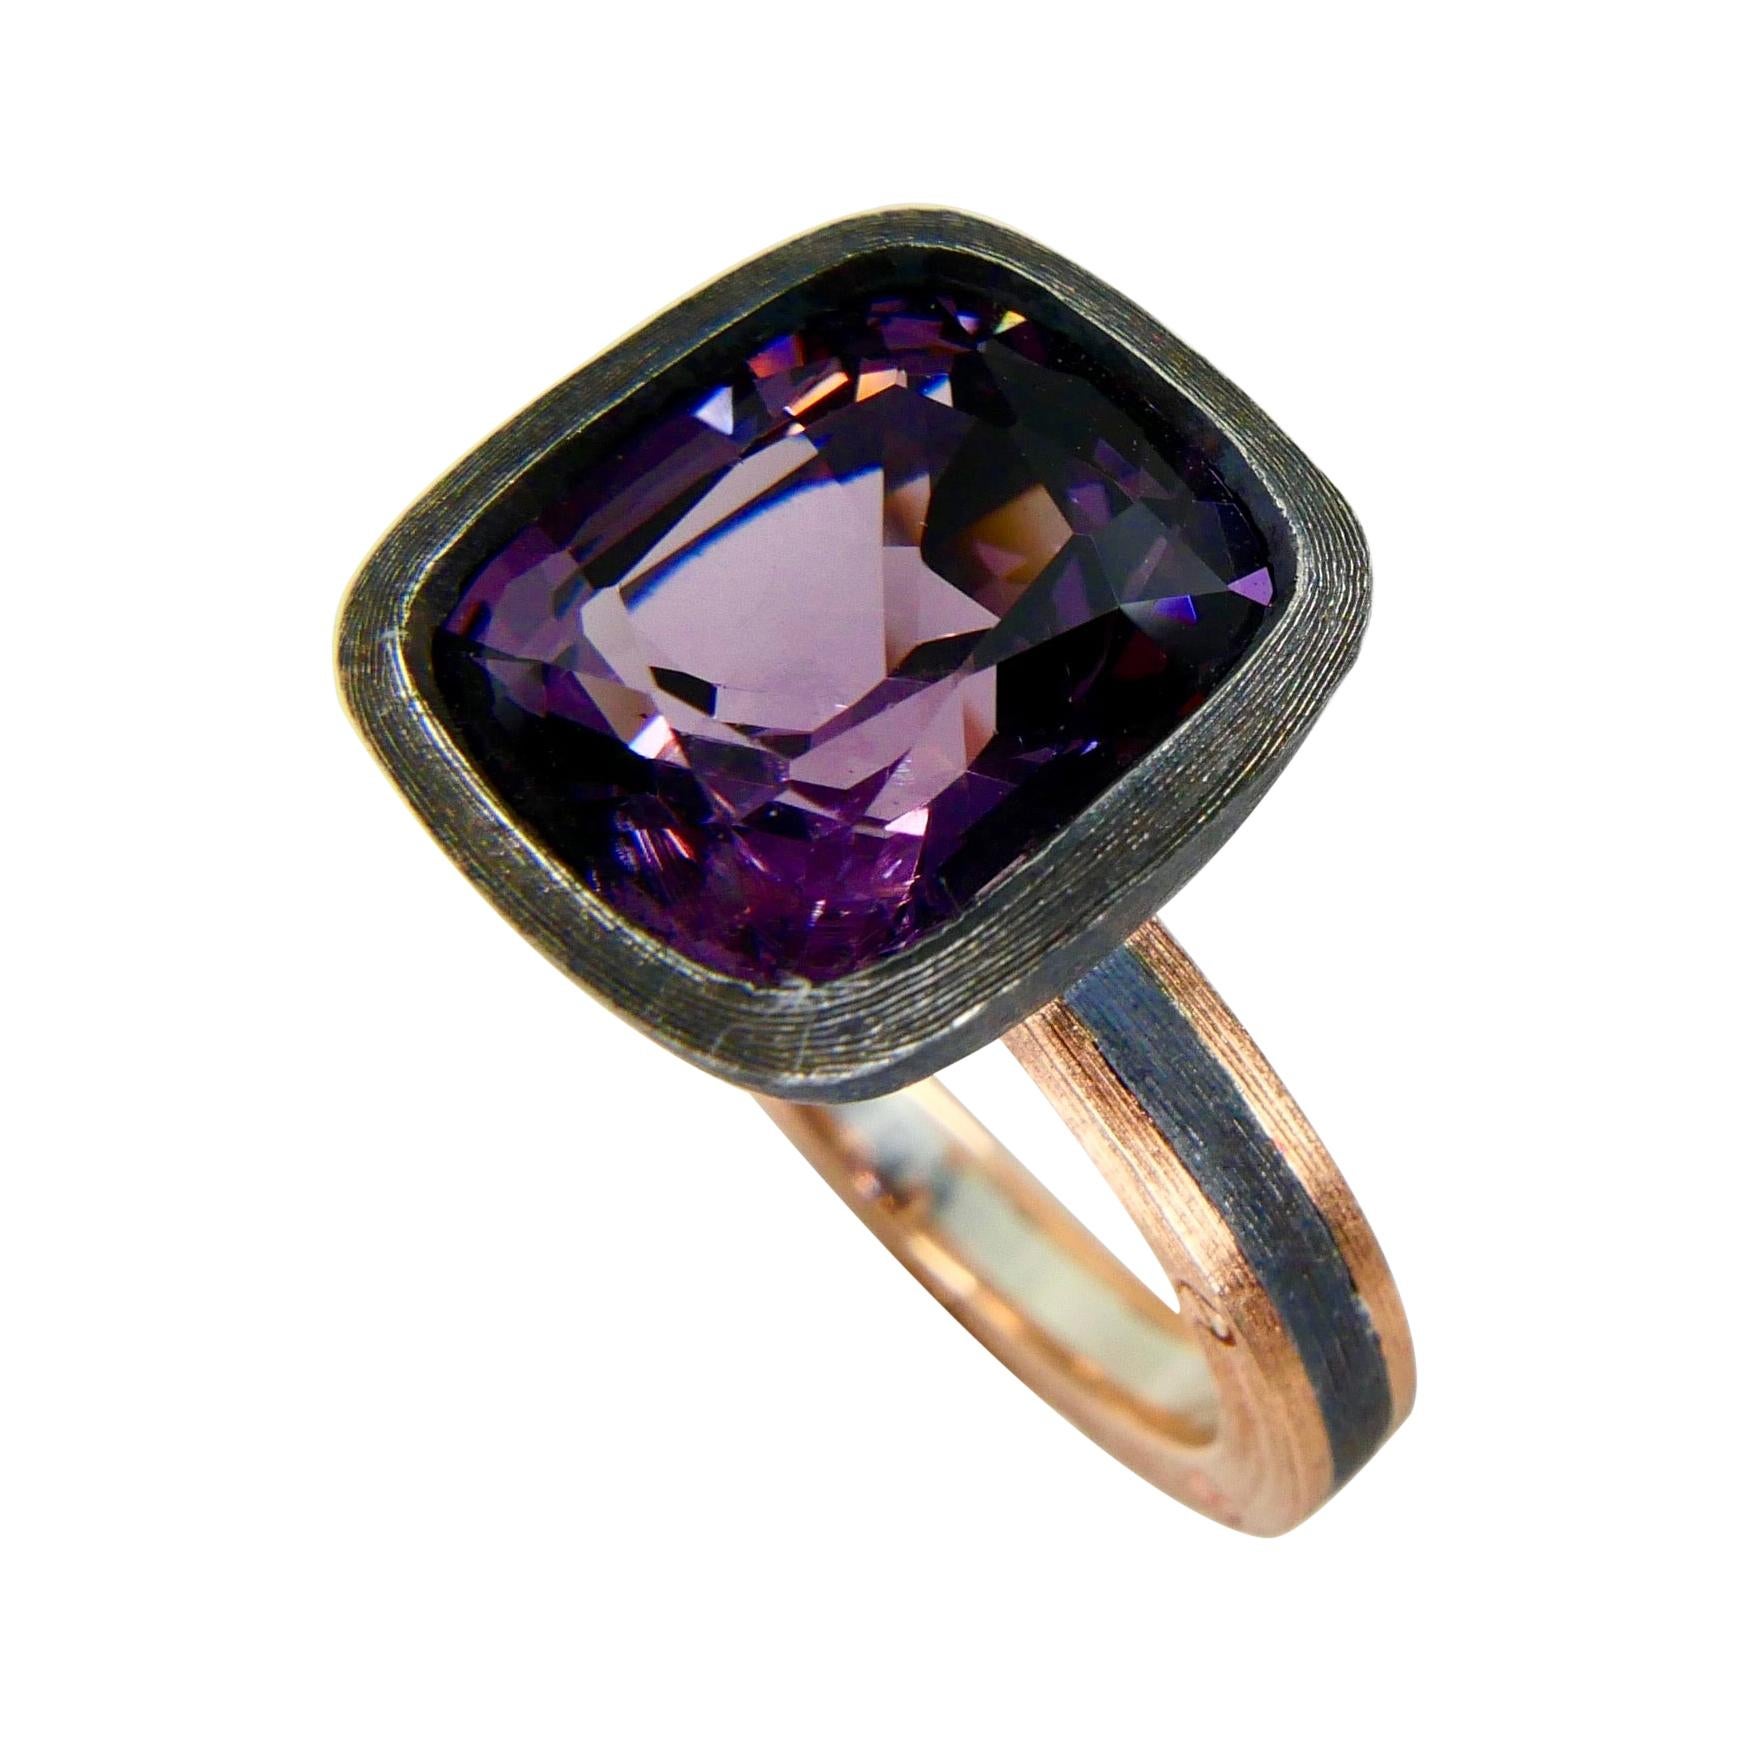 5.46 Carat Purple Spinel Ring Set in Combination of 18k Gold & 925 Silver